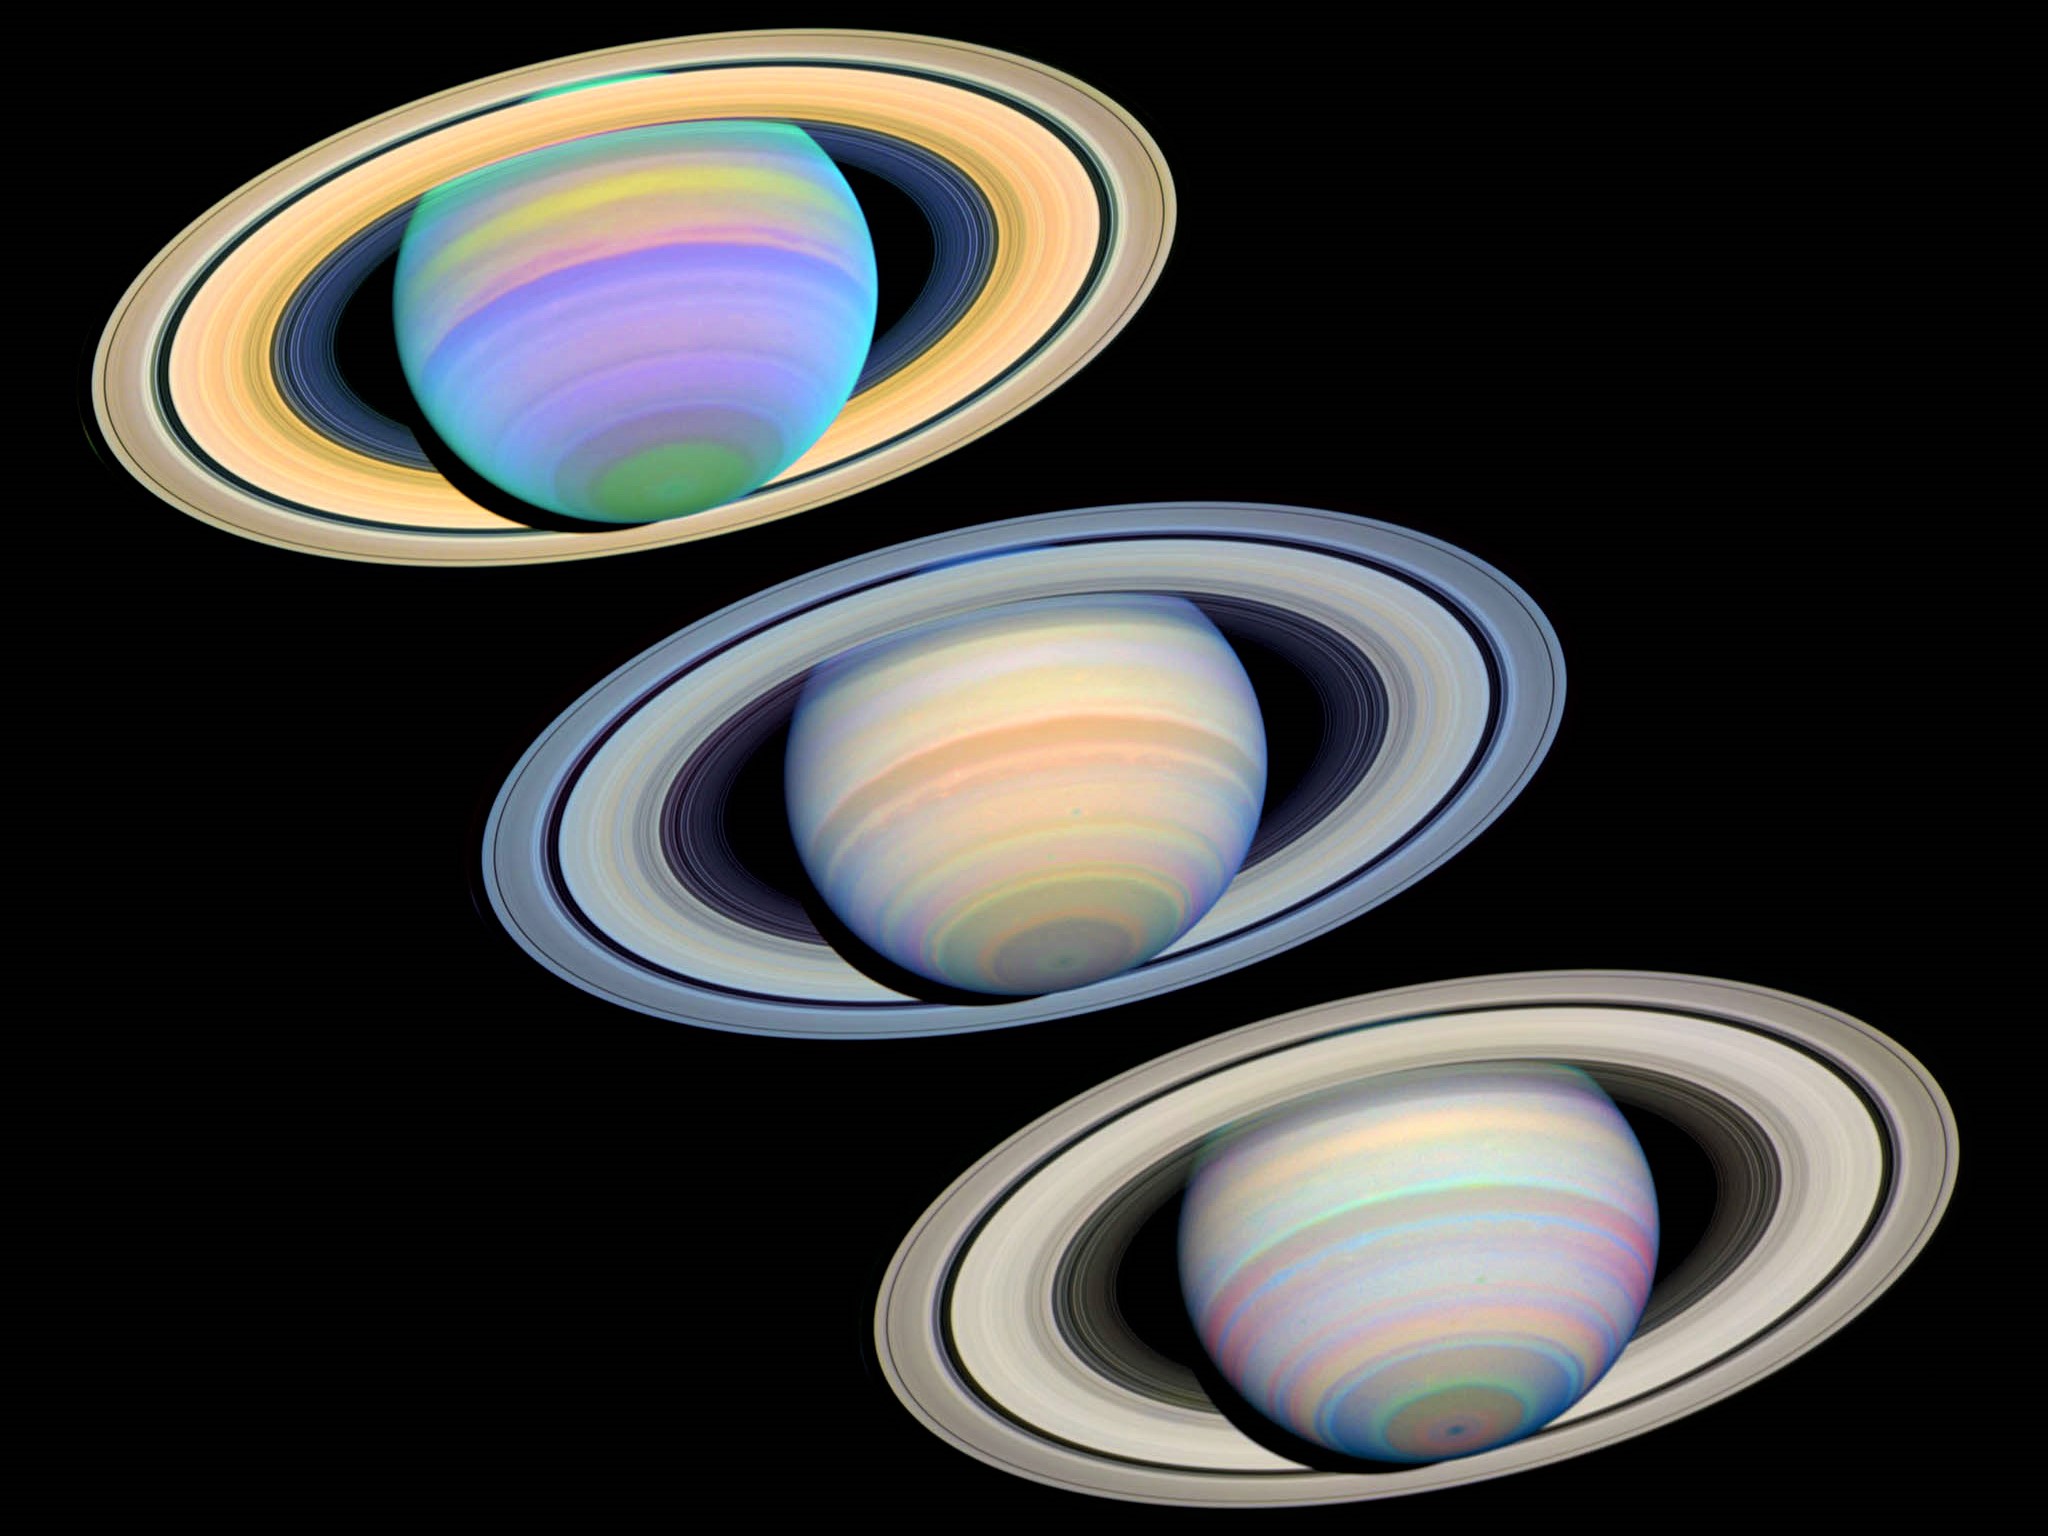 Three views of Saturn captured in 2003 by the Hubble Space Telescope.&nbsp;